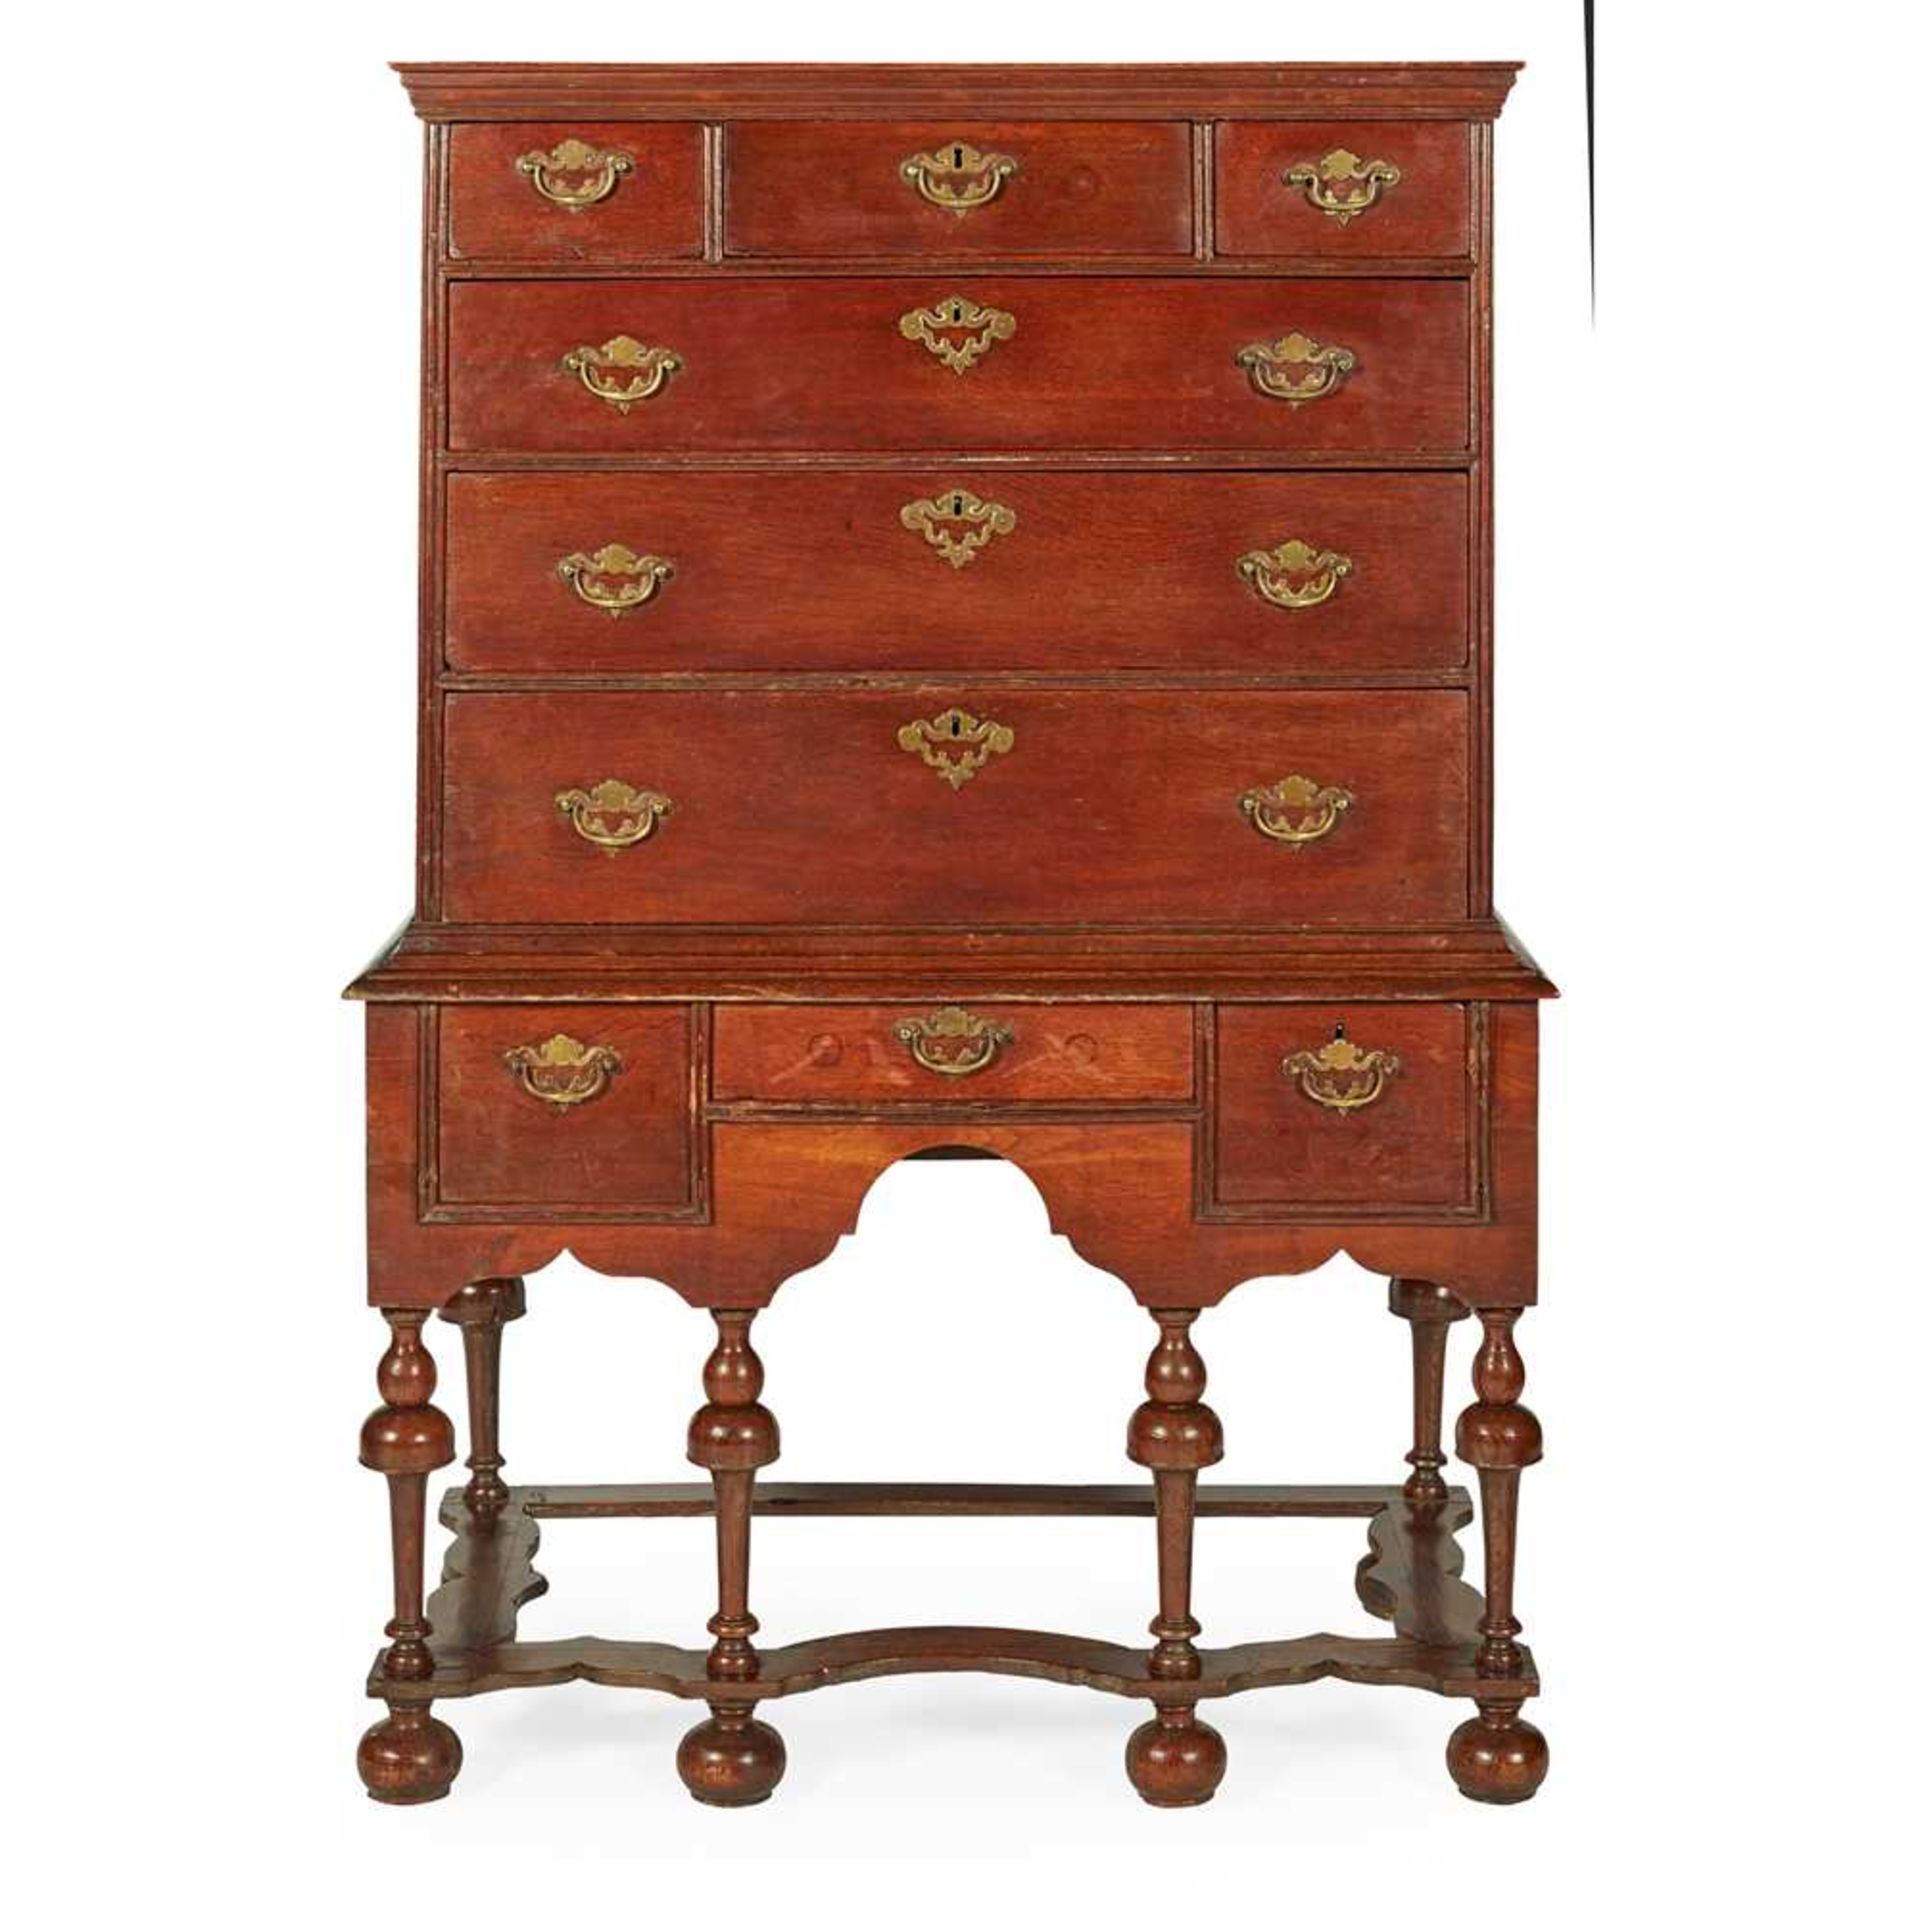 QUEEN ANNE OAK CHEST-ON-STAND EARLY 18TH CENTURY